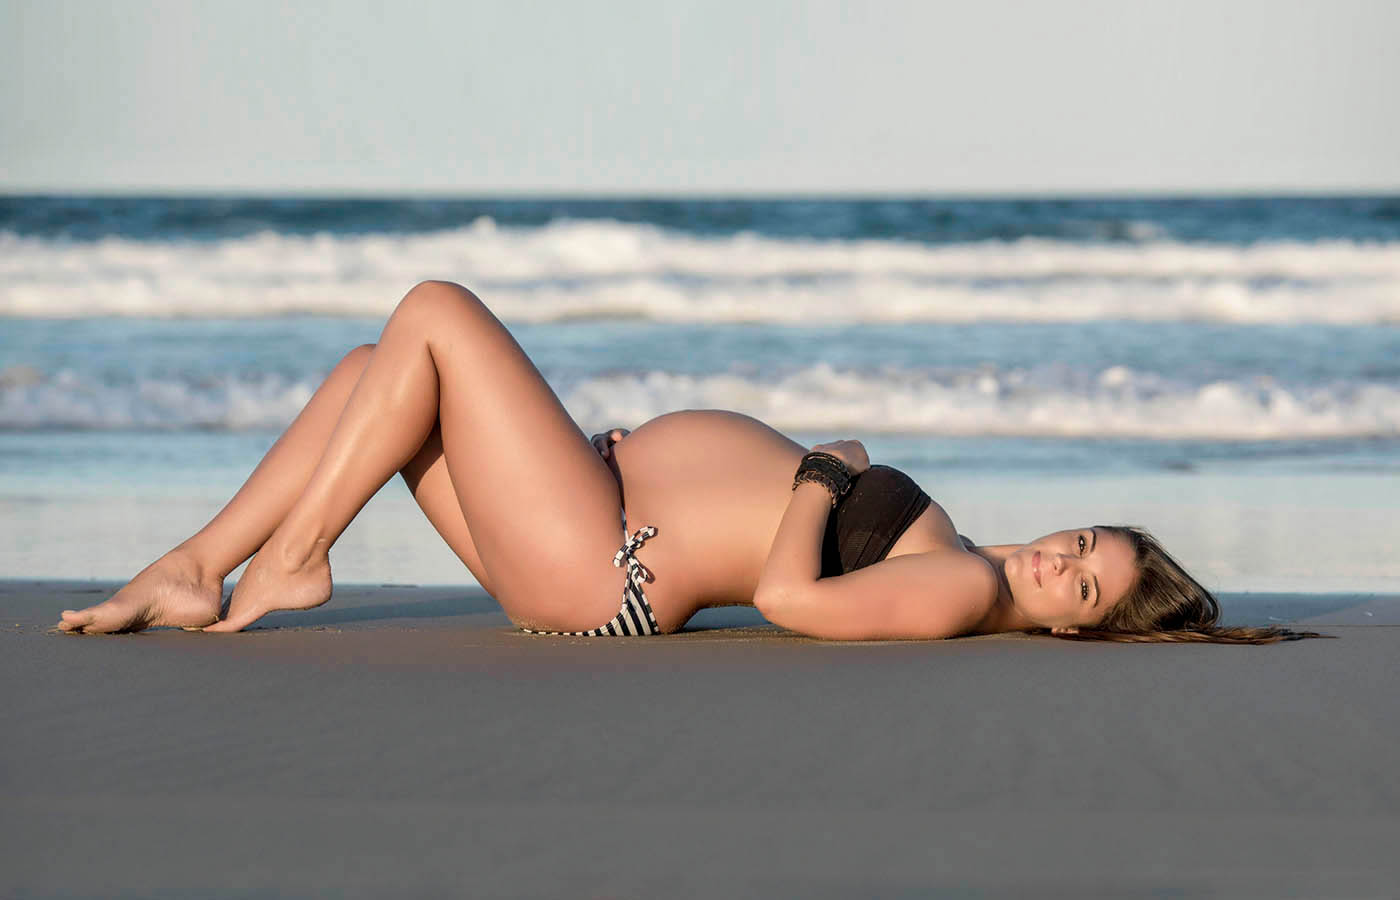 A maternity photograph of a woman on a beach in Brisbane by Jessica Loren.